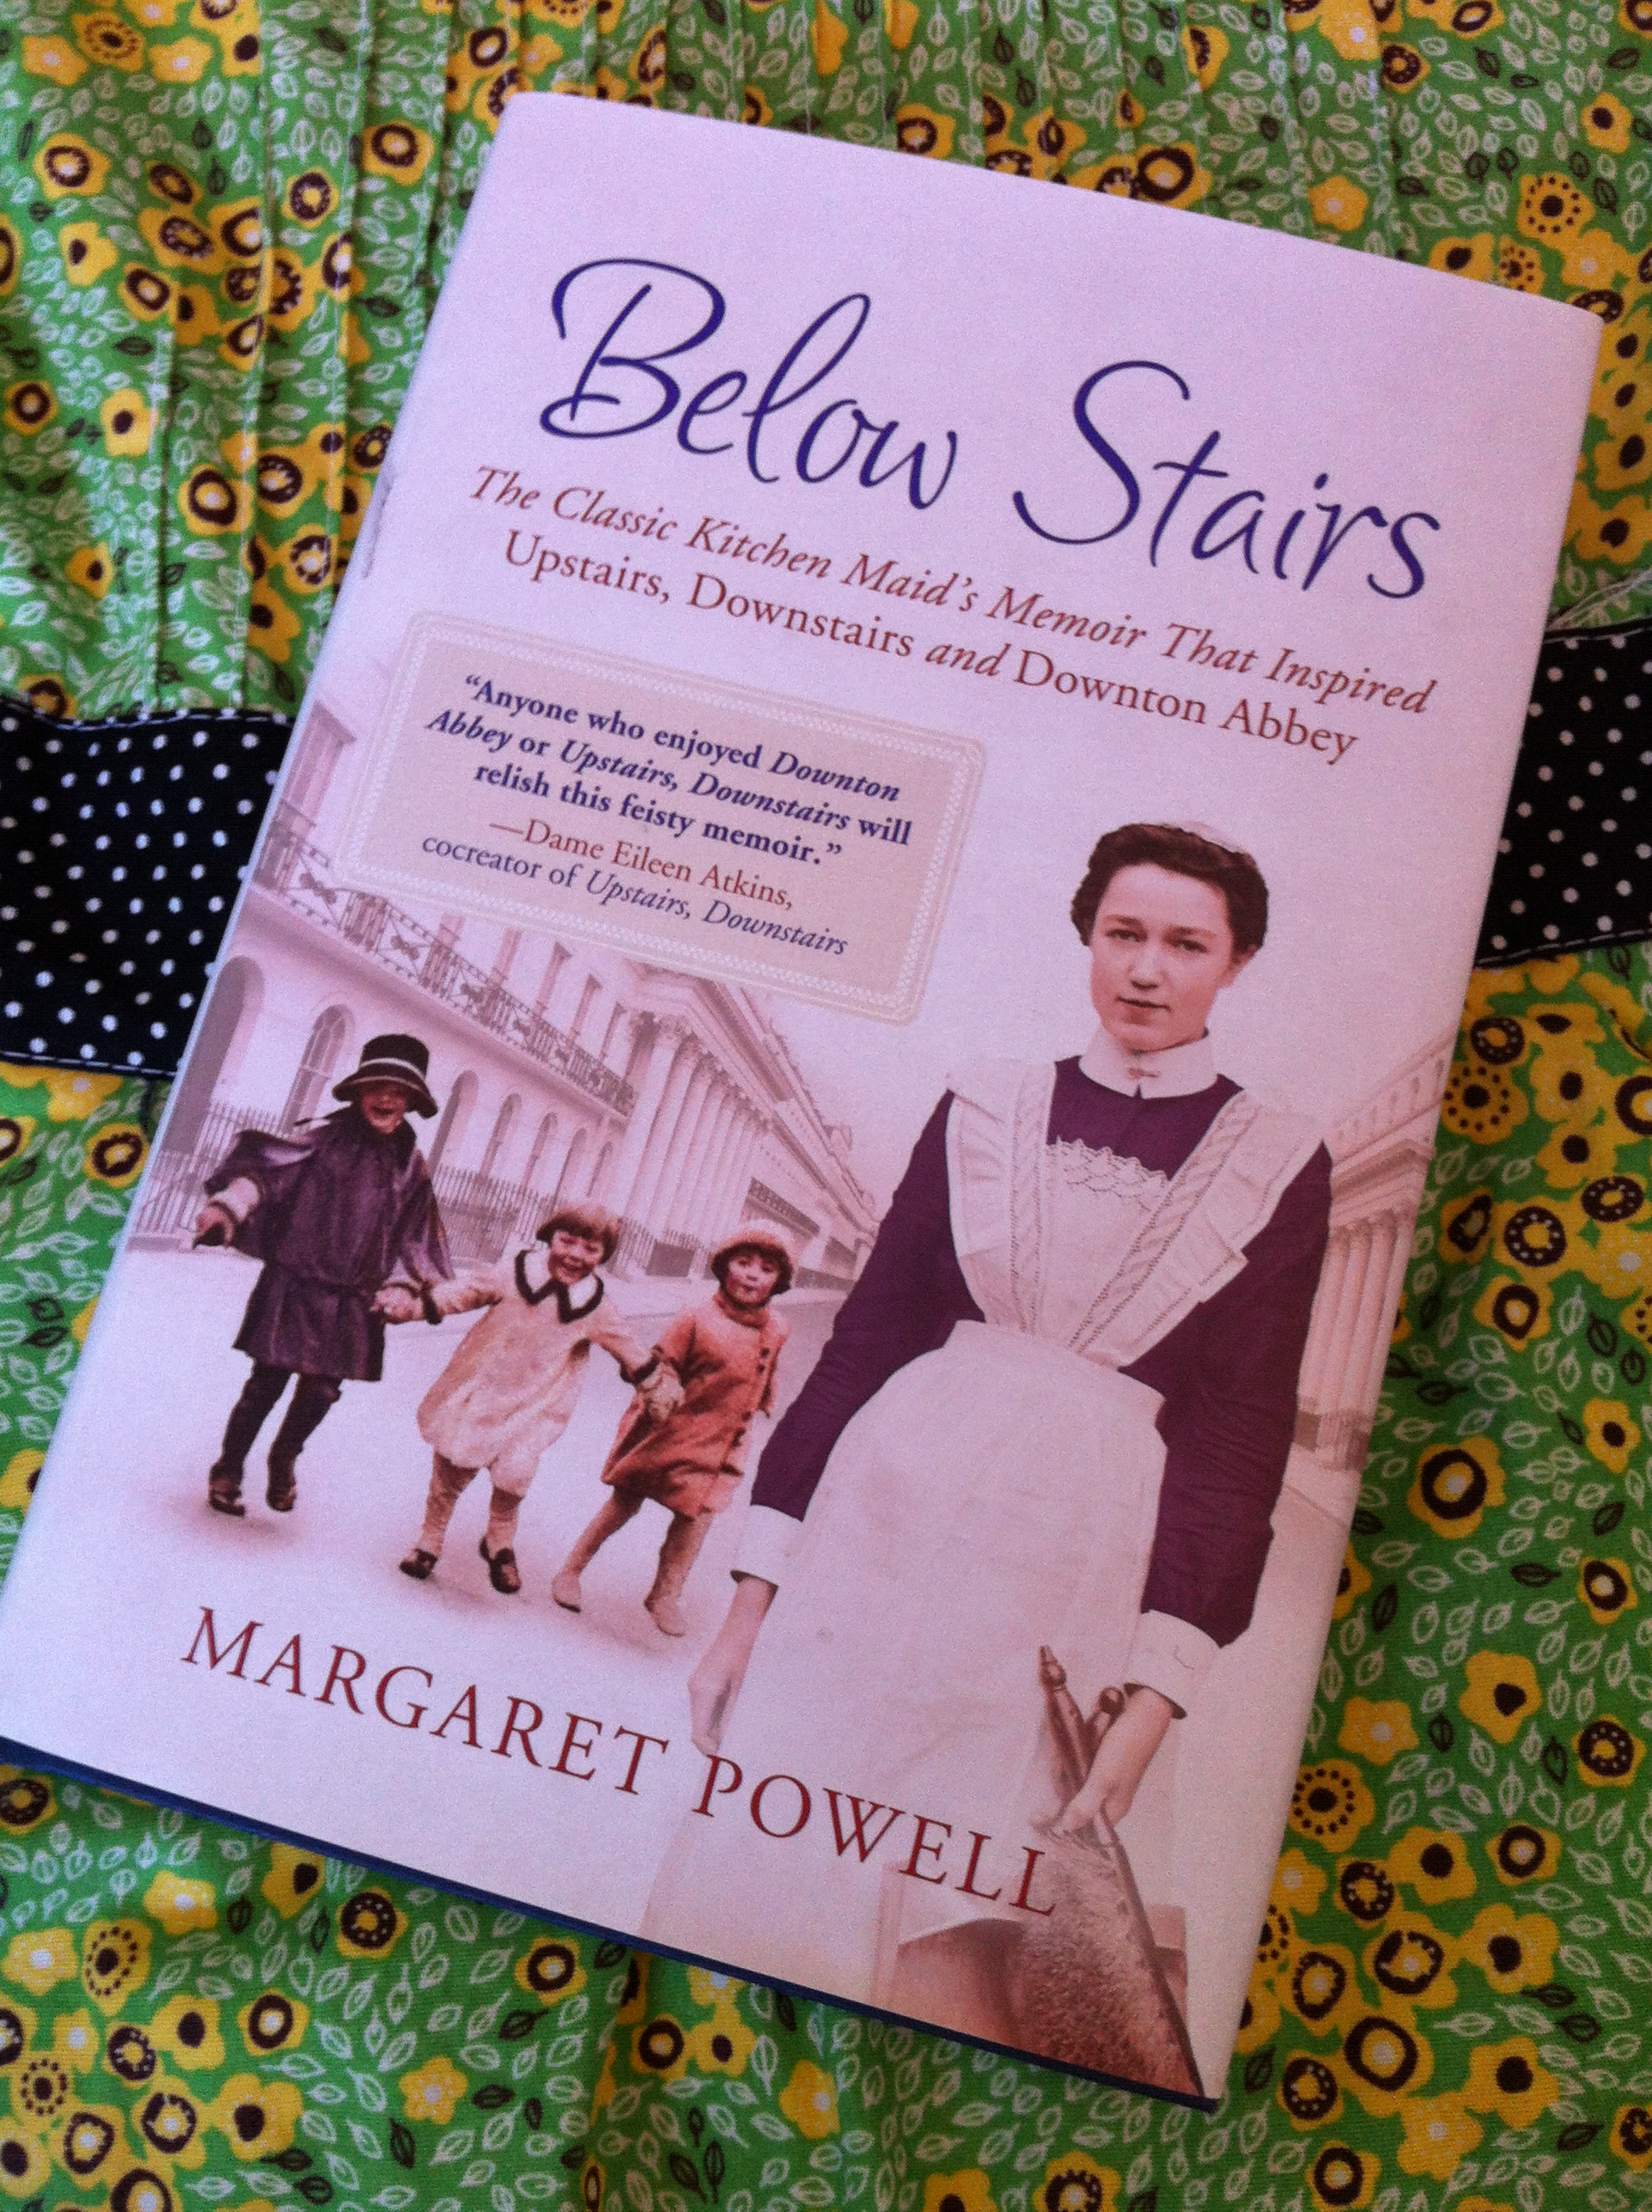 Below Stairs The Classic Kitchen Maids Memoir That Inspired Upstairs
Downstairs and Downton Abbey Epub-Ebook